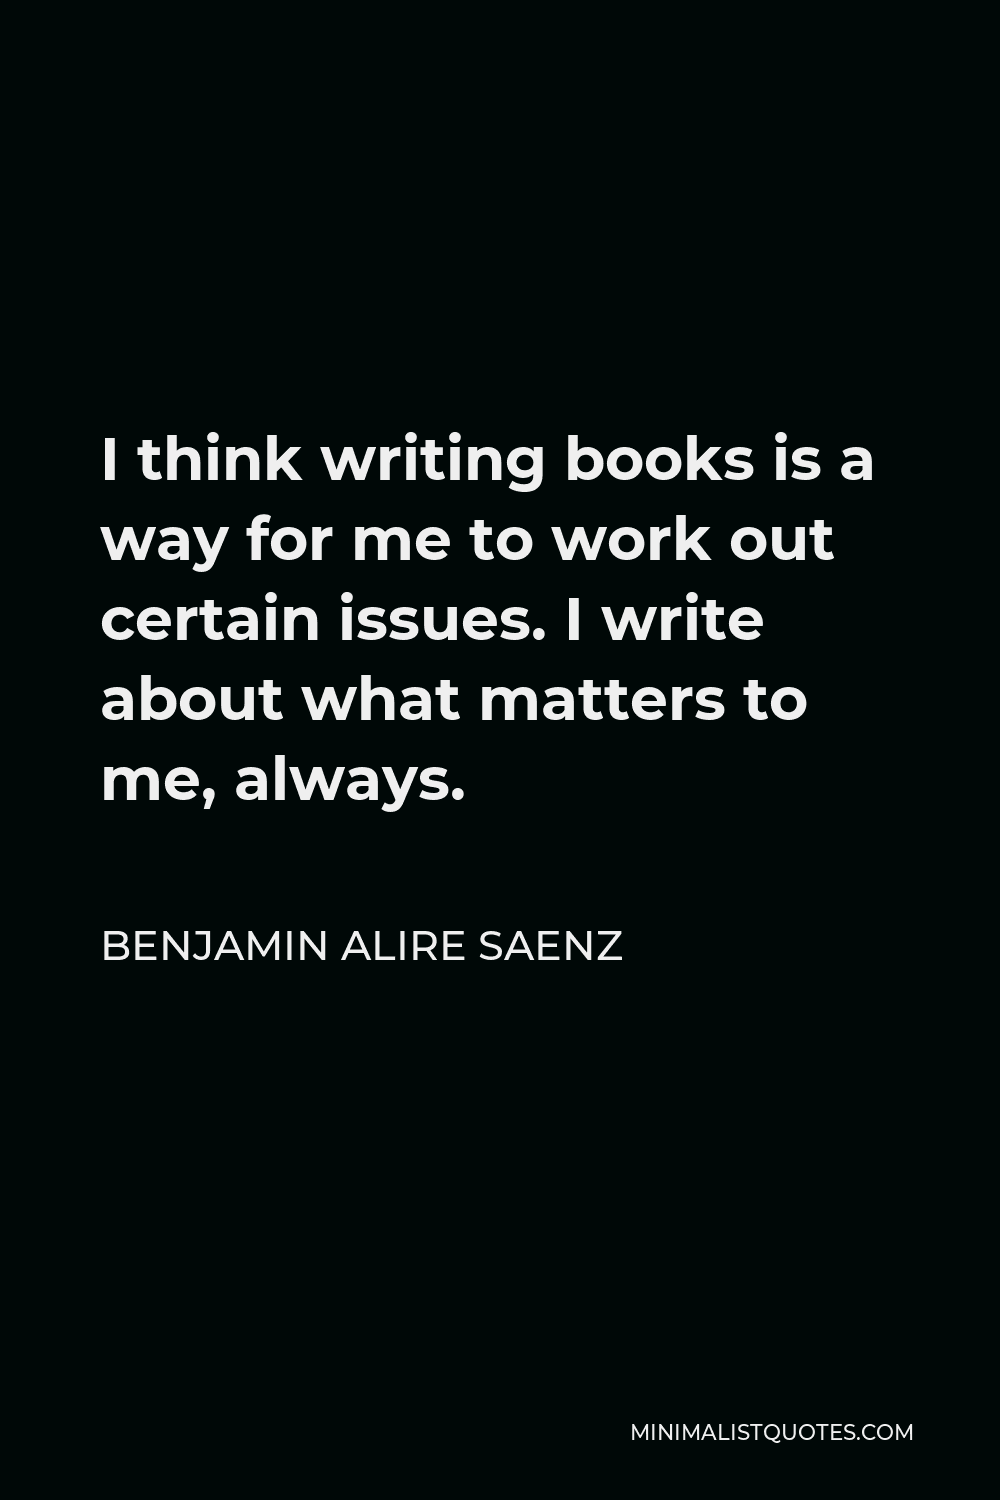 Benjamin Alire Saenz Quote - I think writing books is a way for me to work out certain issues. I write about what matters to me, always.